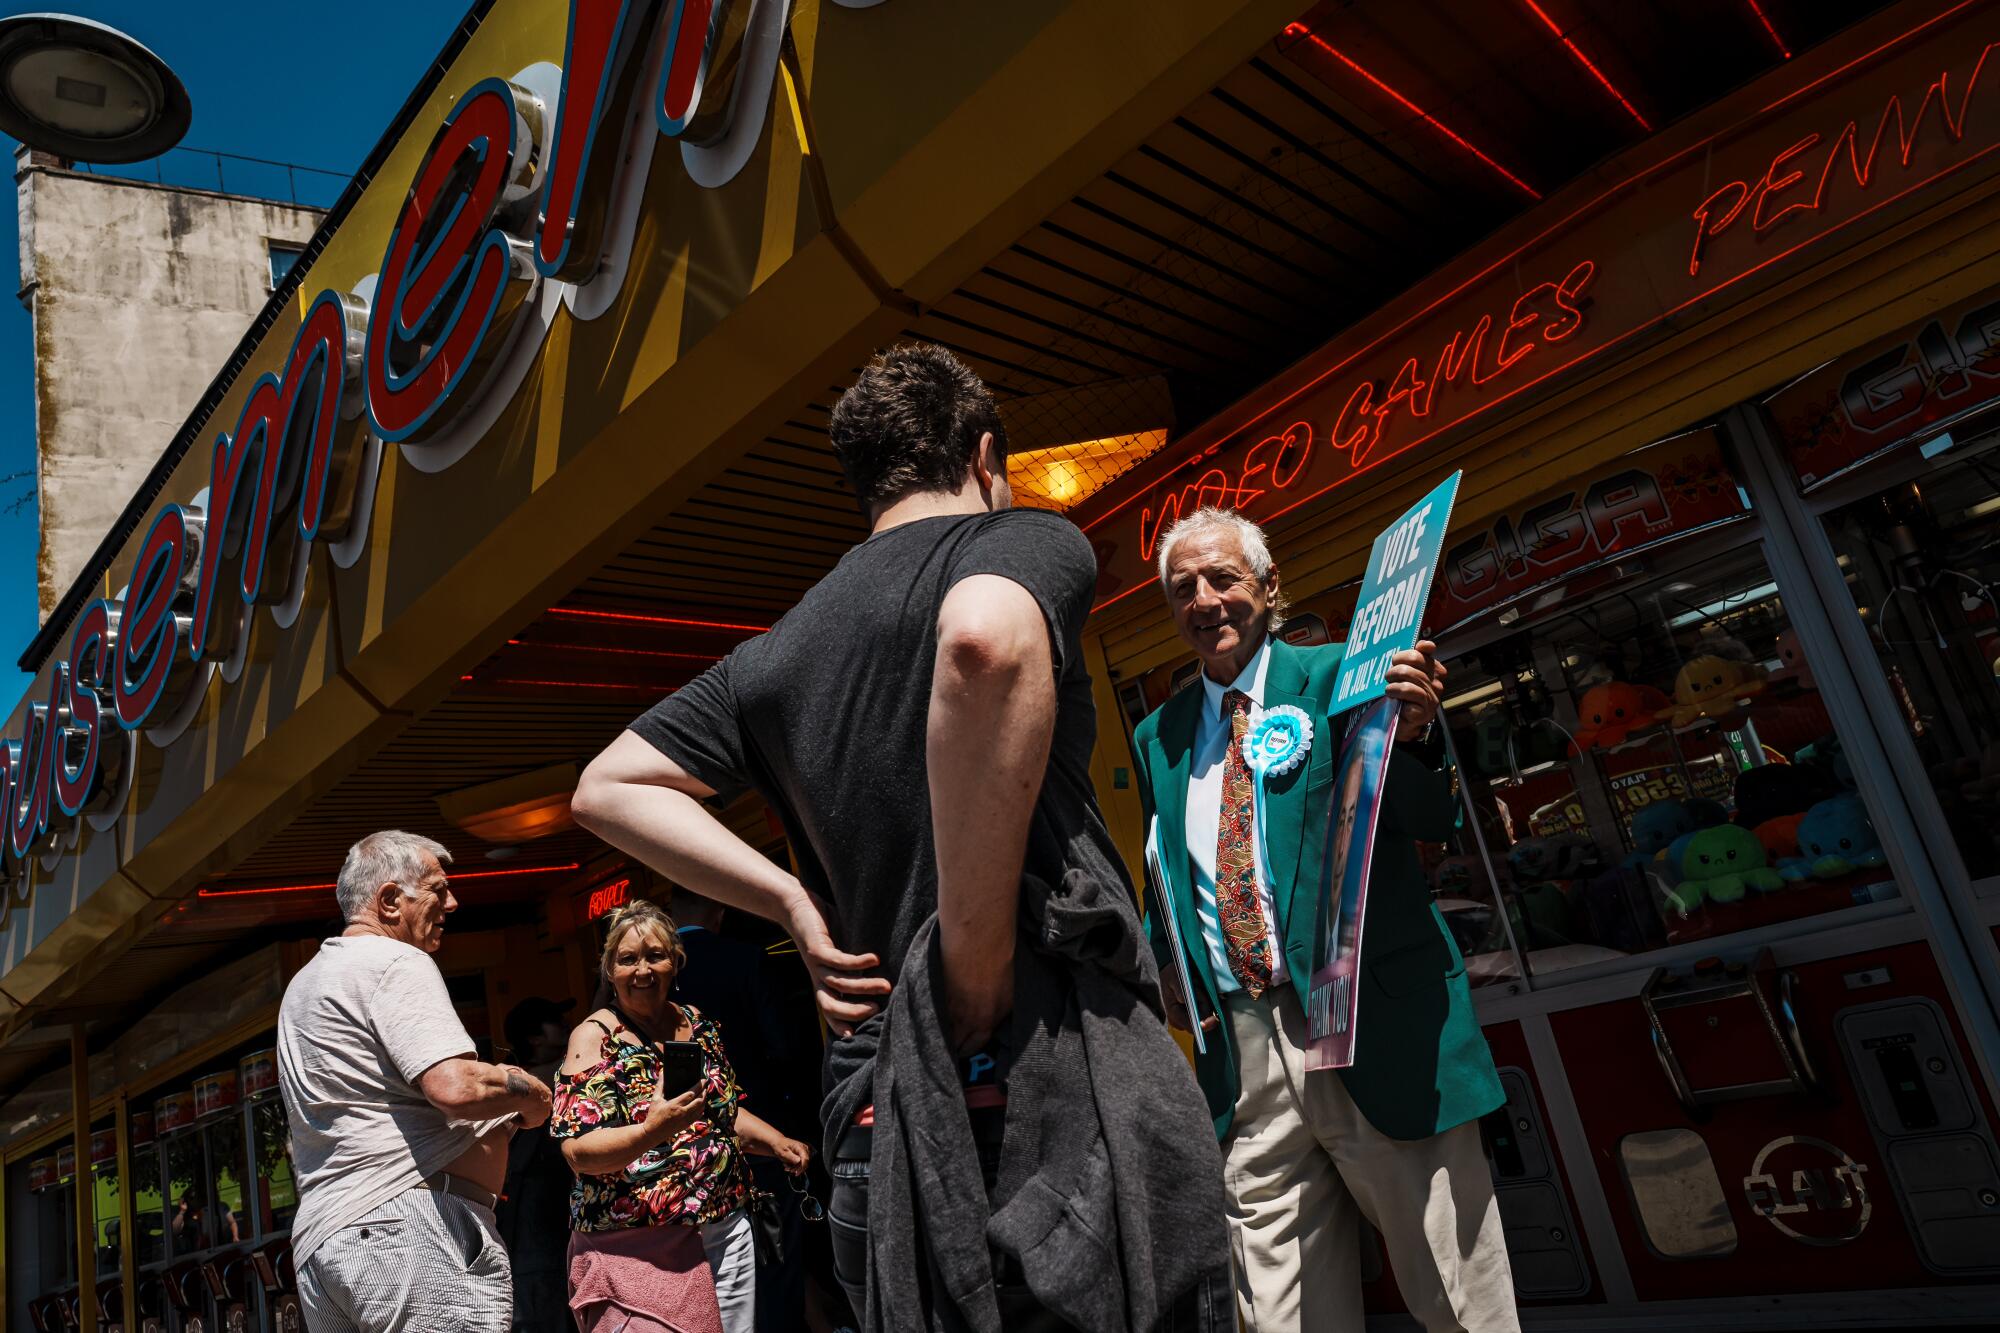 A man in a green jacket campaigns for Nigel Farage outside an arcade. 